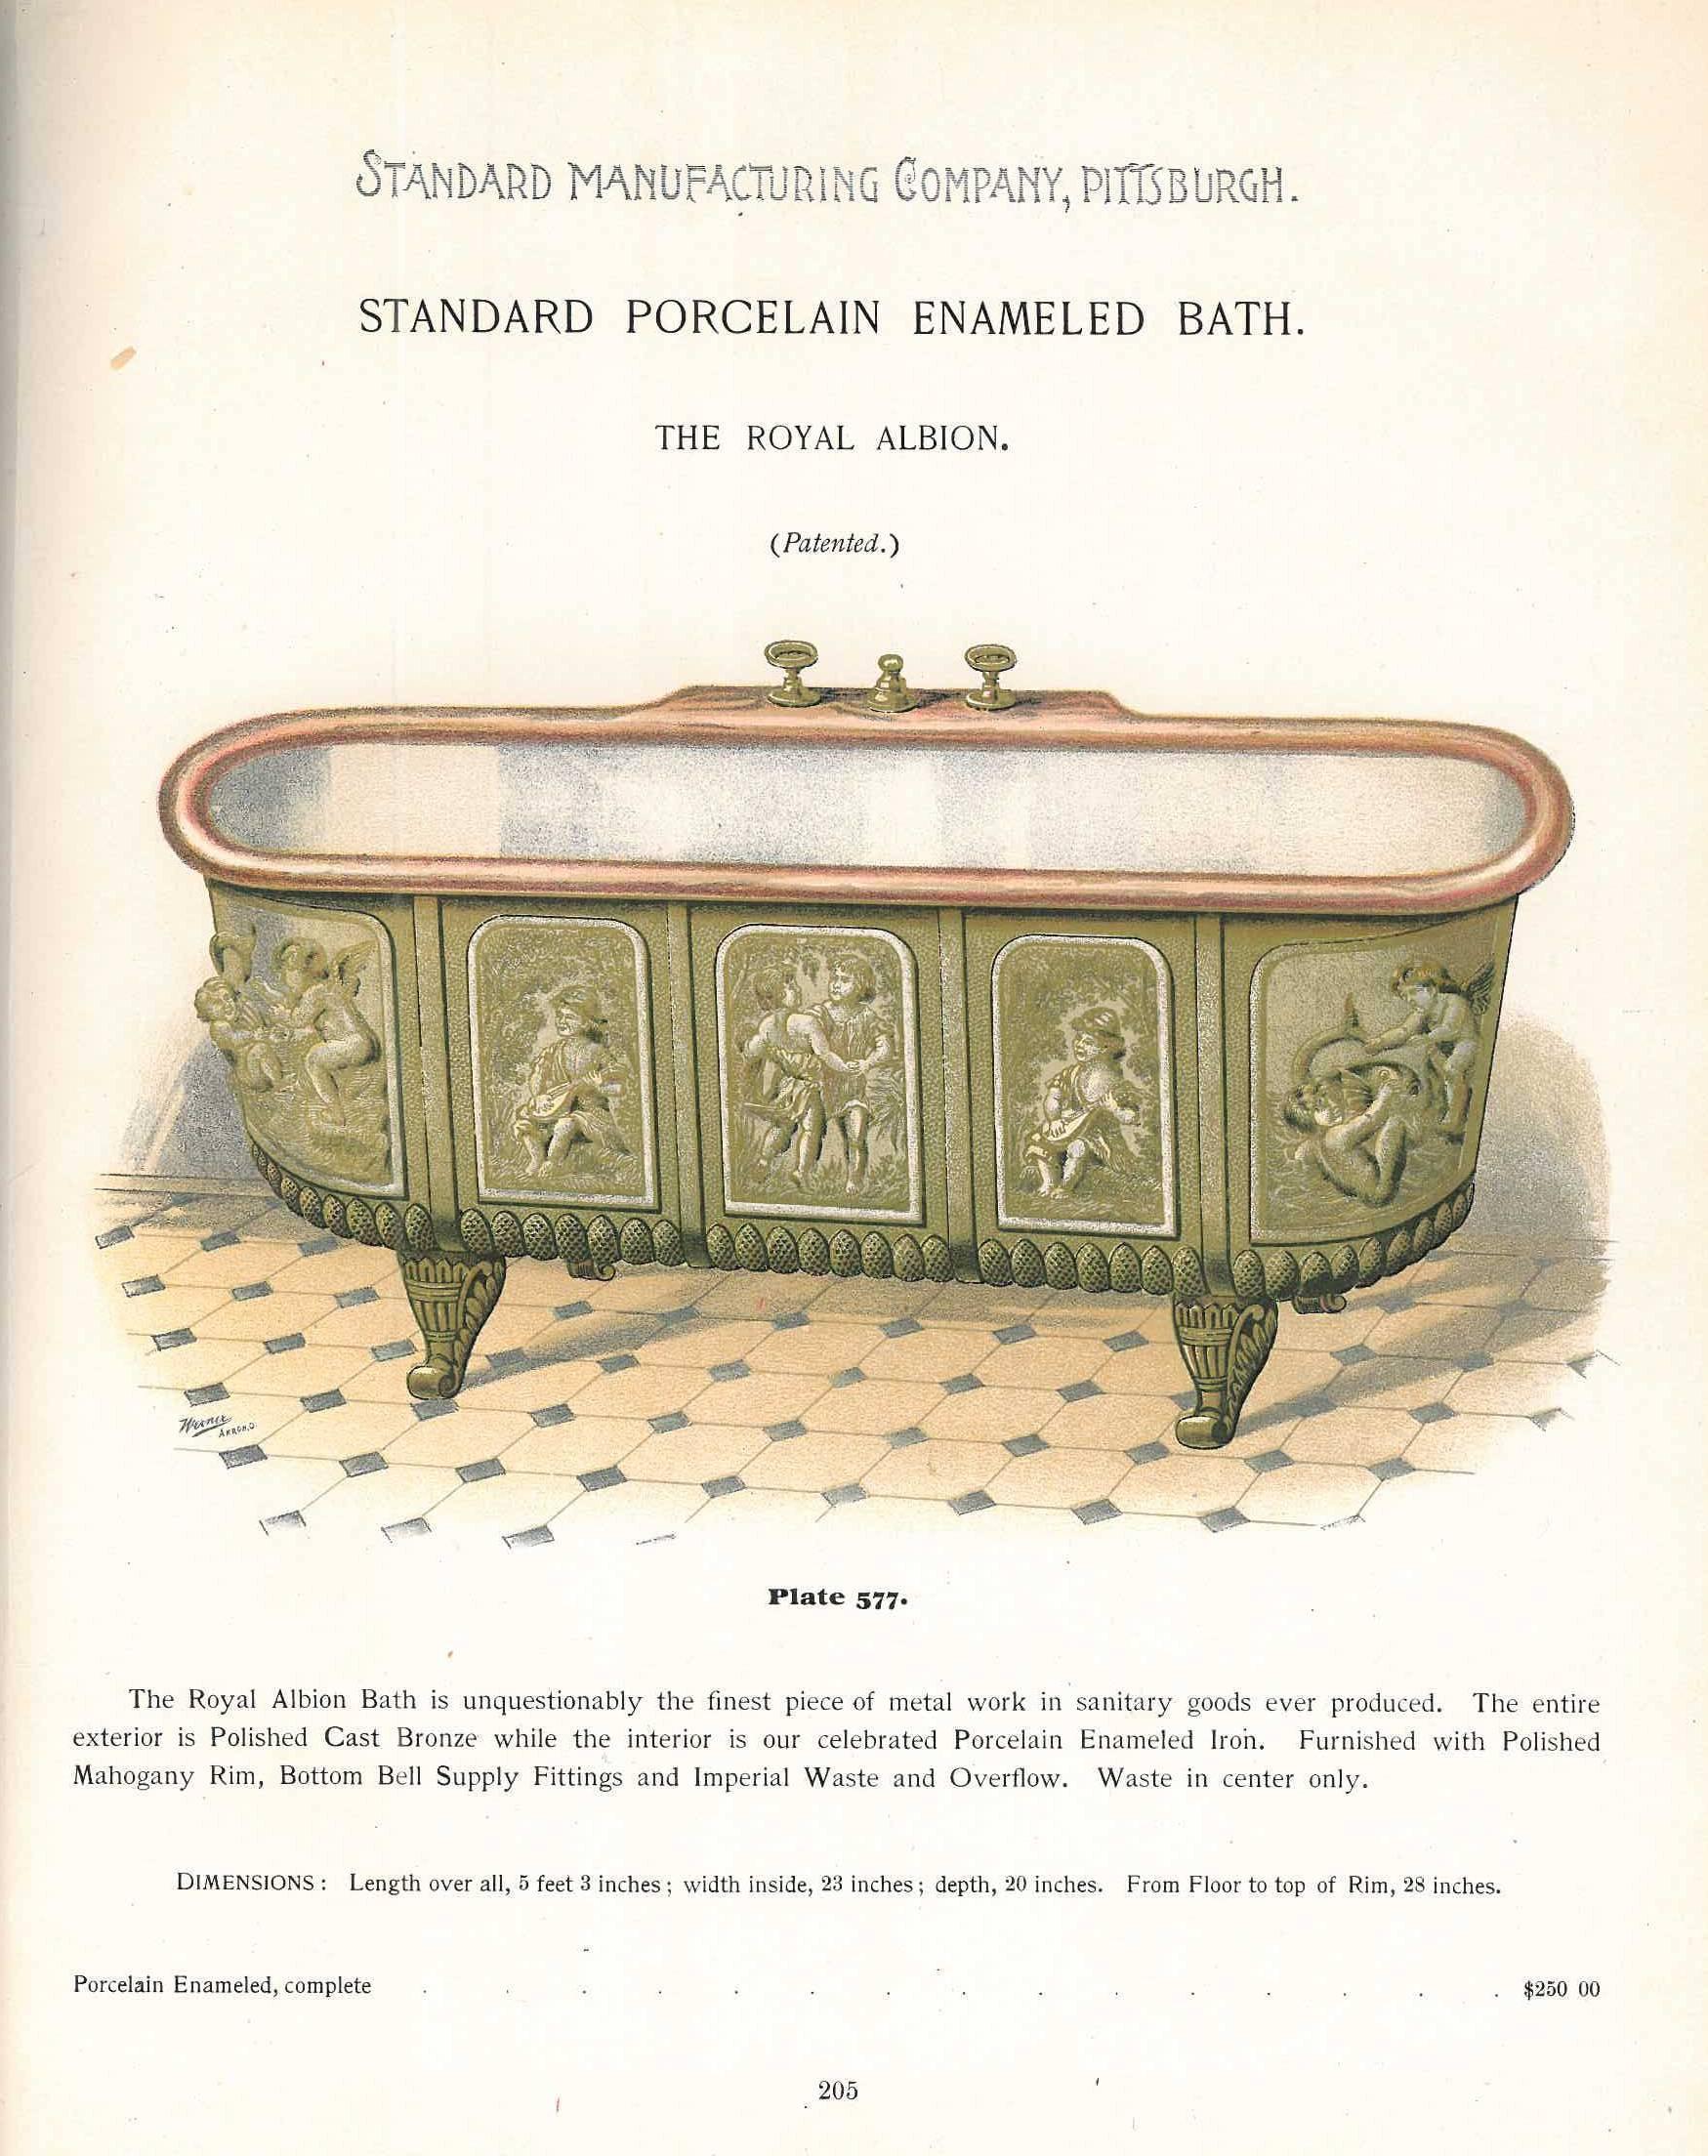 Late 19th Century Standard Manufacturing Co. Pittsburgh Catalogue of Sanitary and Plumbing Goods